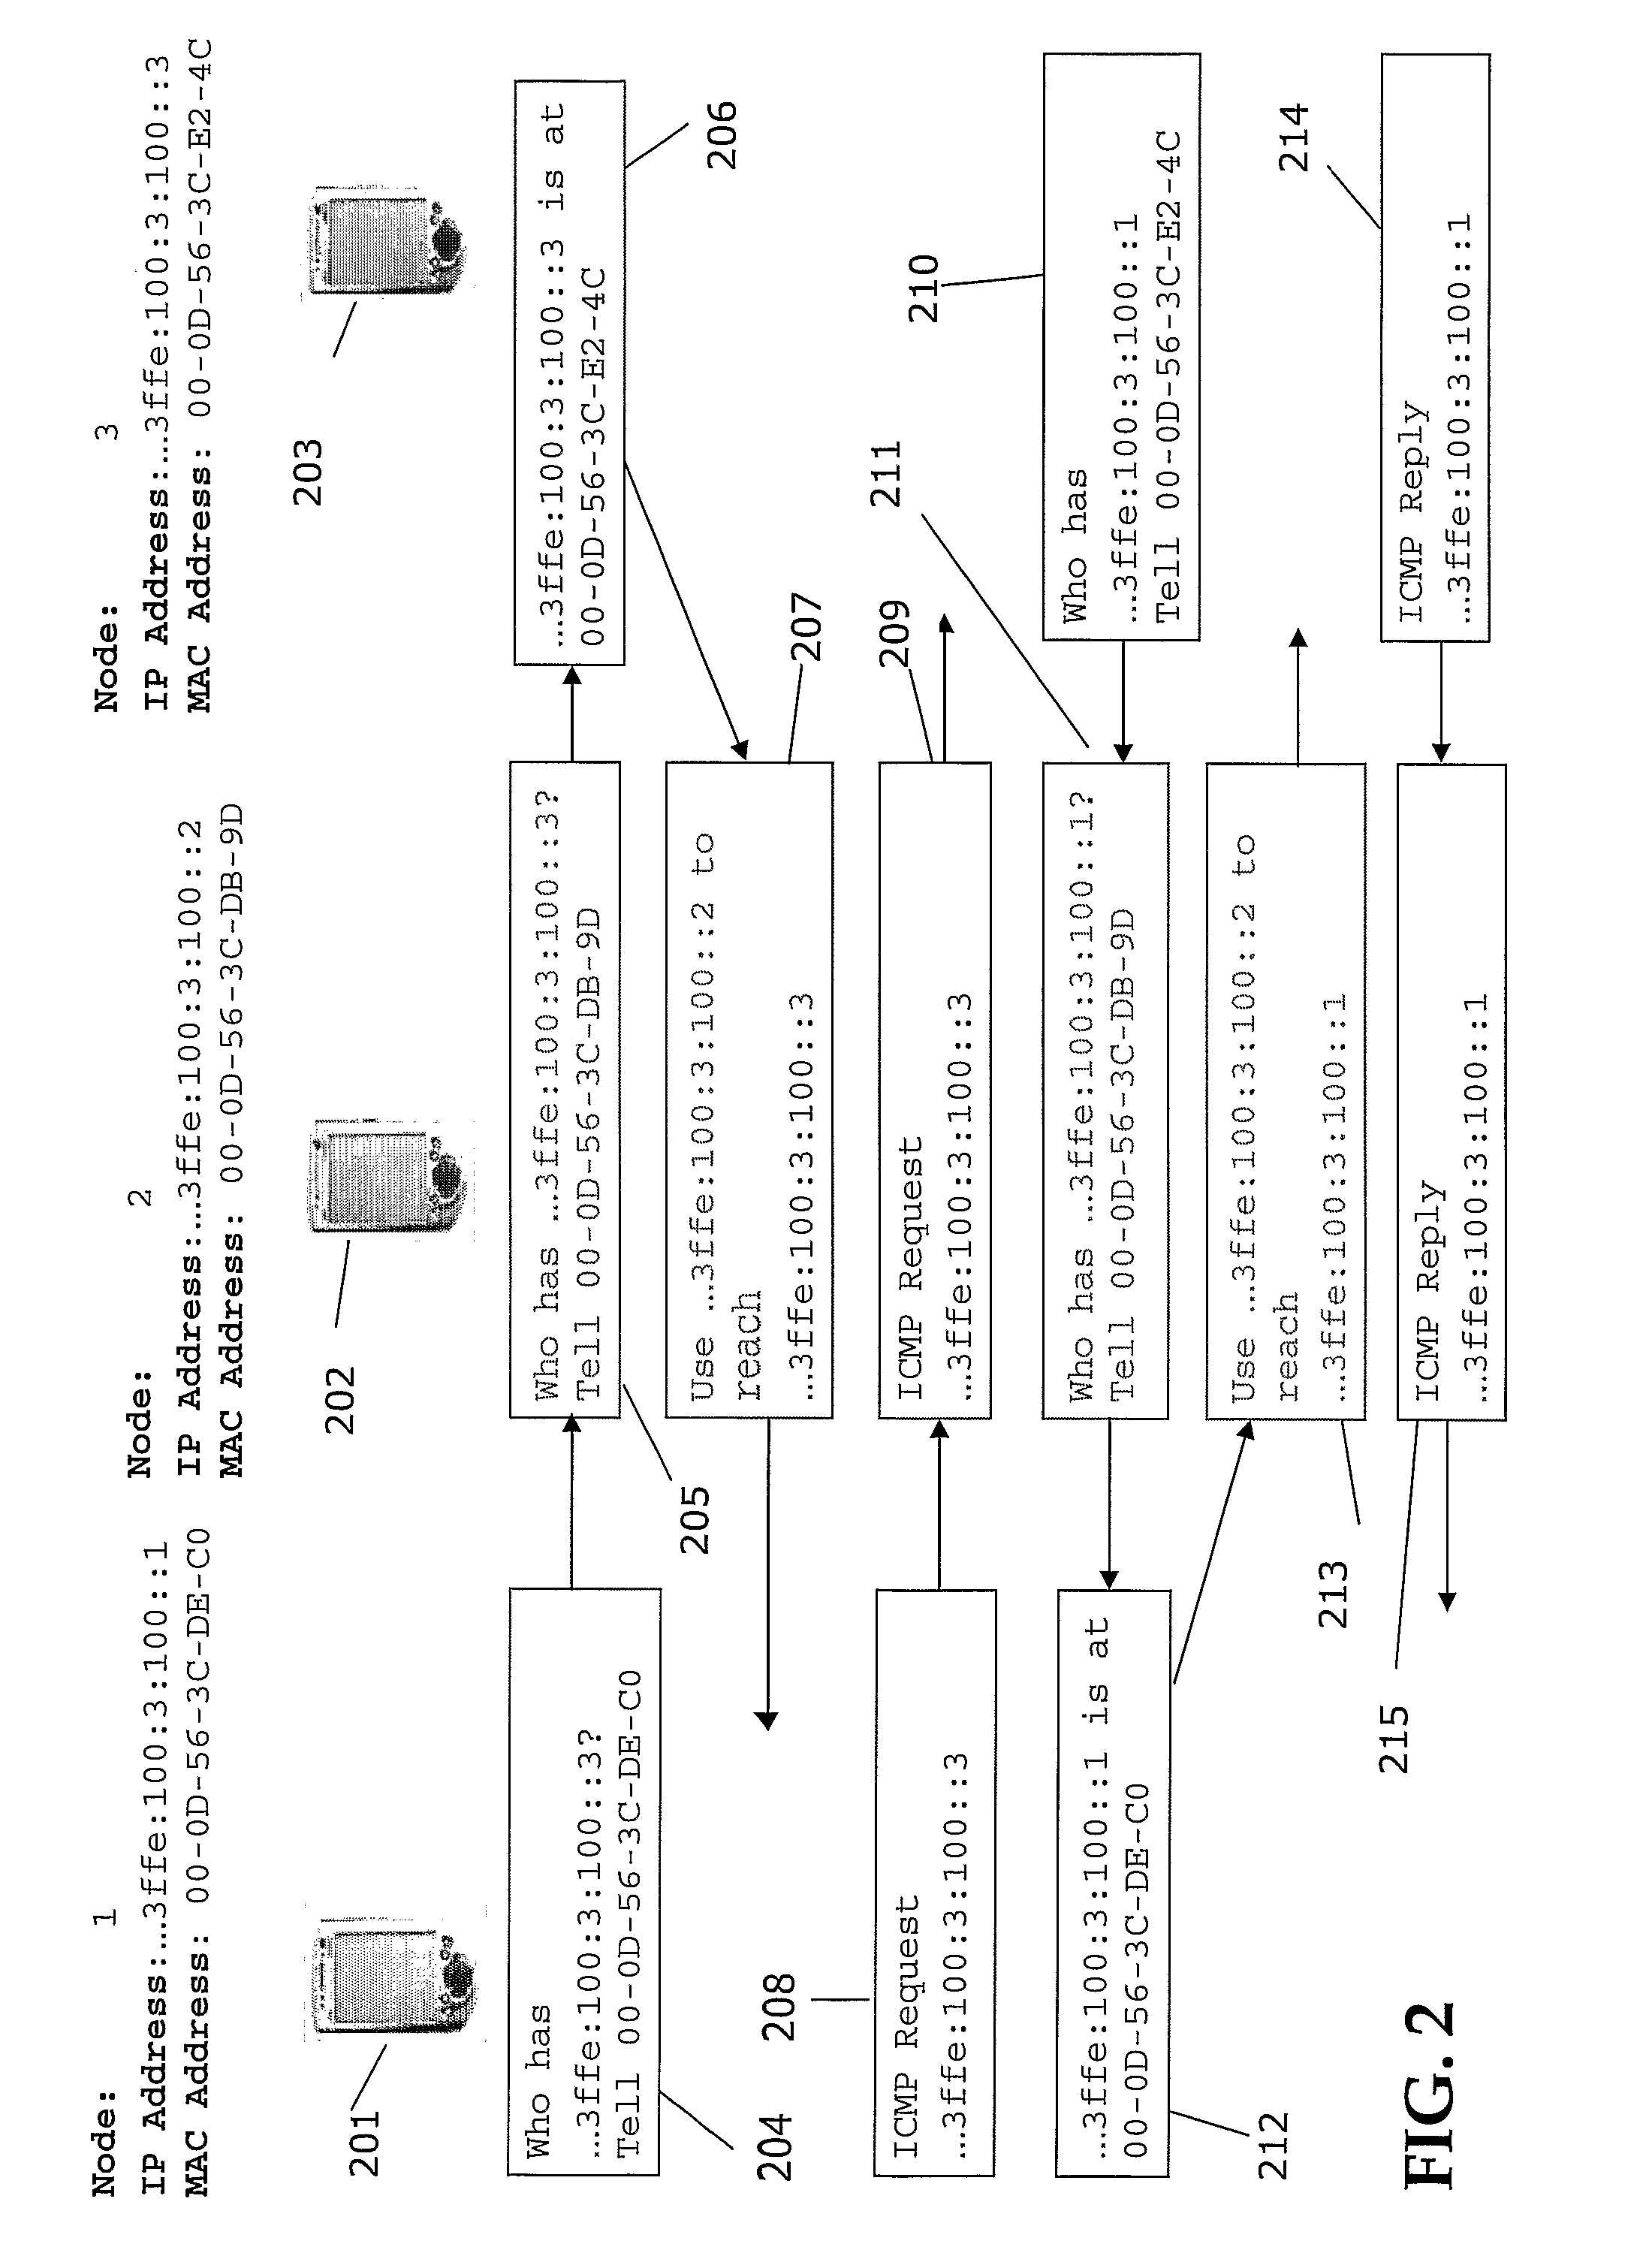 Method, Communication Device and System for Detecting Neighboring Nodes in a Wireless Multihop Network Using Ndp